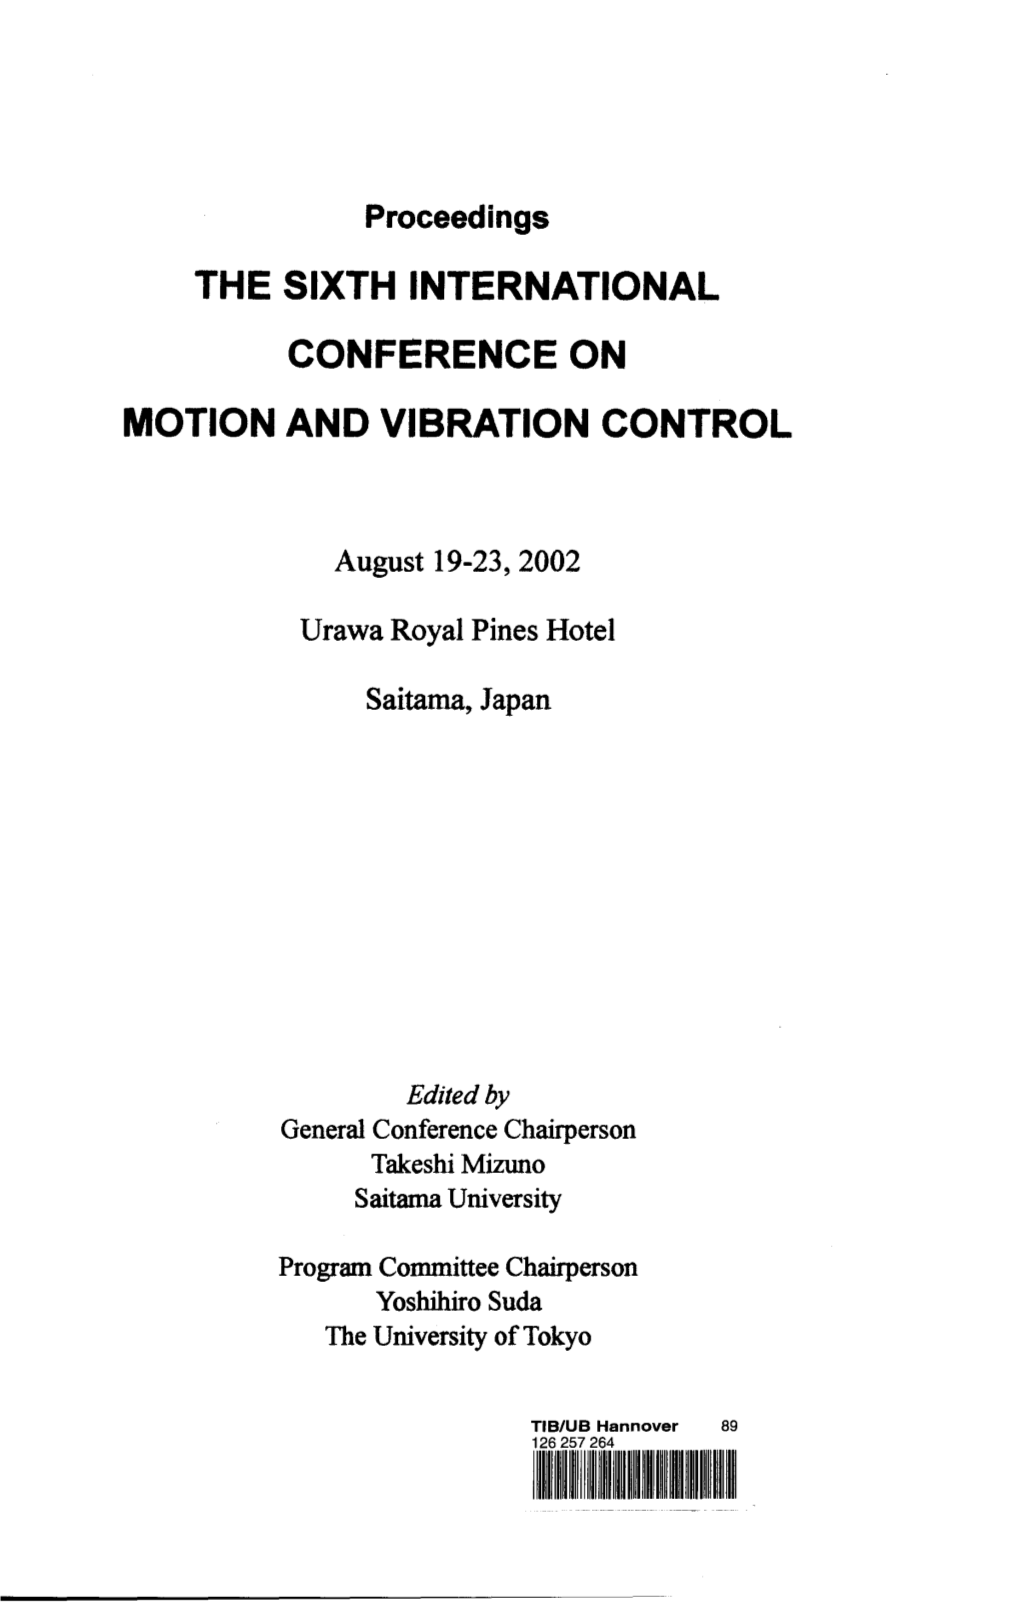 The Sixth International Conference on Motion and Vibration Control